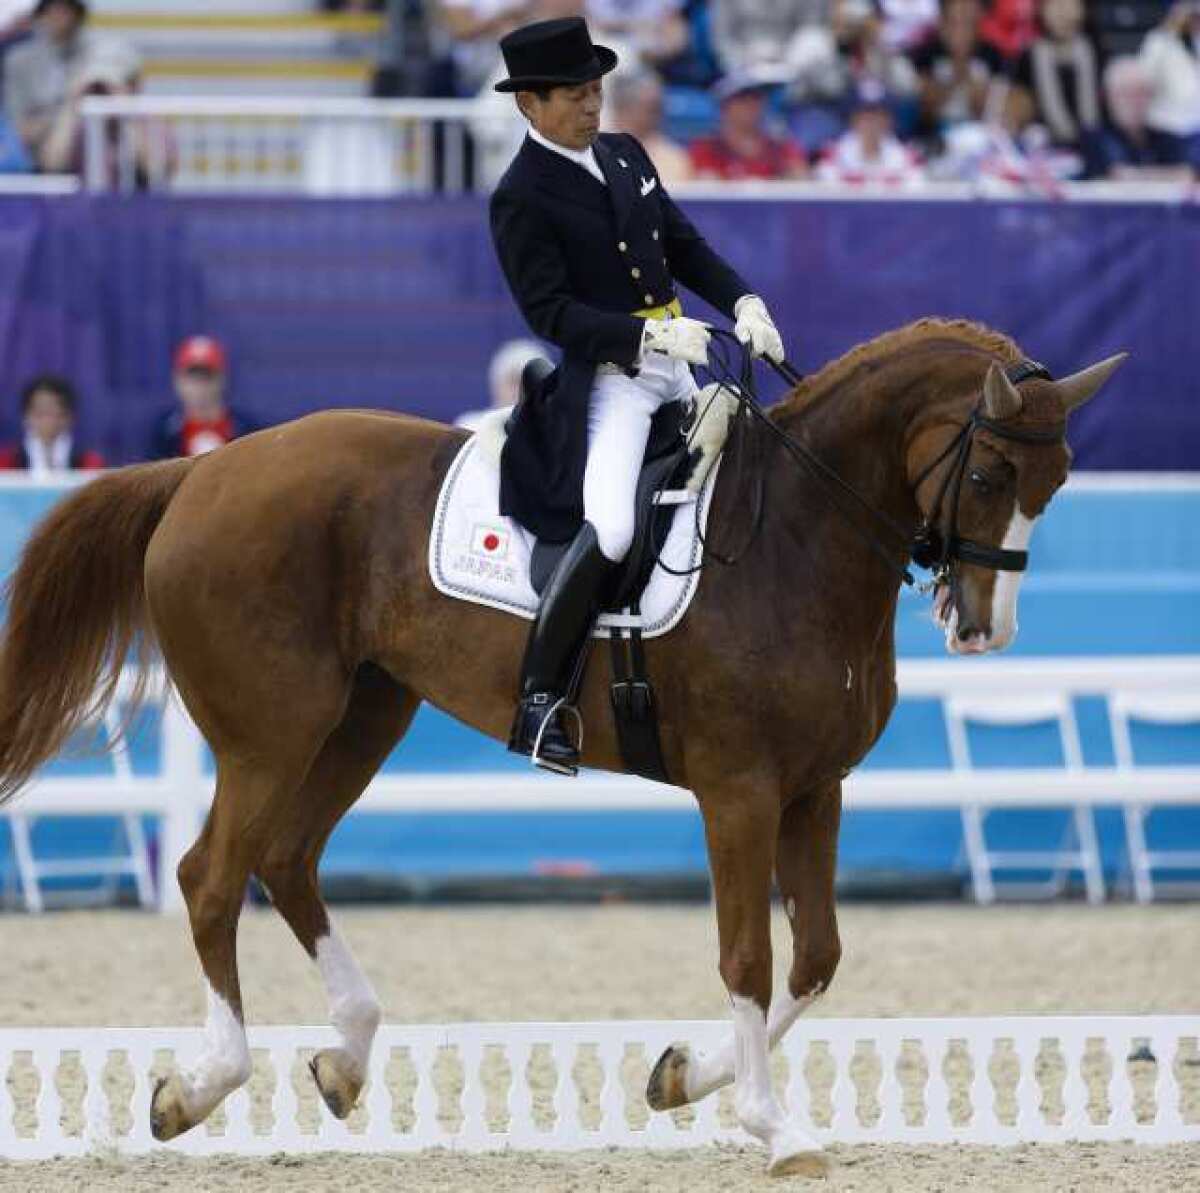 Hiroshi Hoketsu from Japan rides Whisper in the equestrian dressage competition.